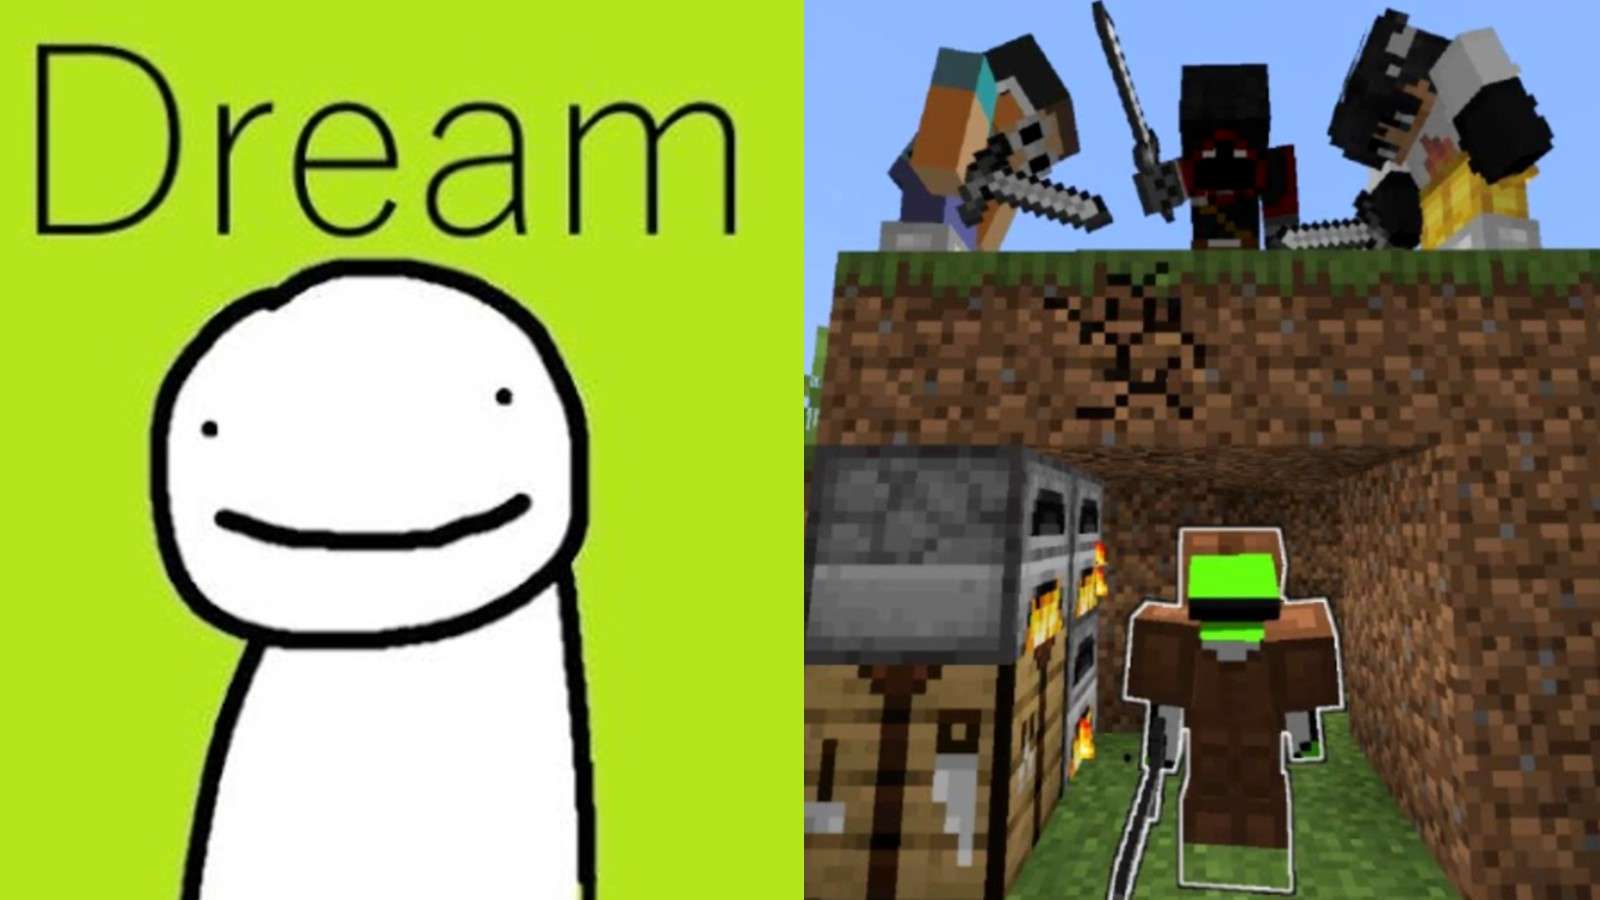 Dream's logo next to four Minecraft characters